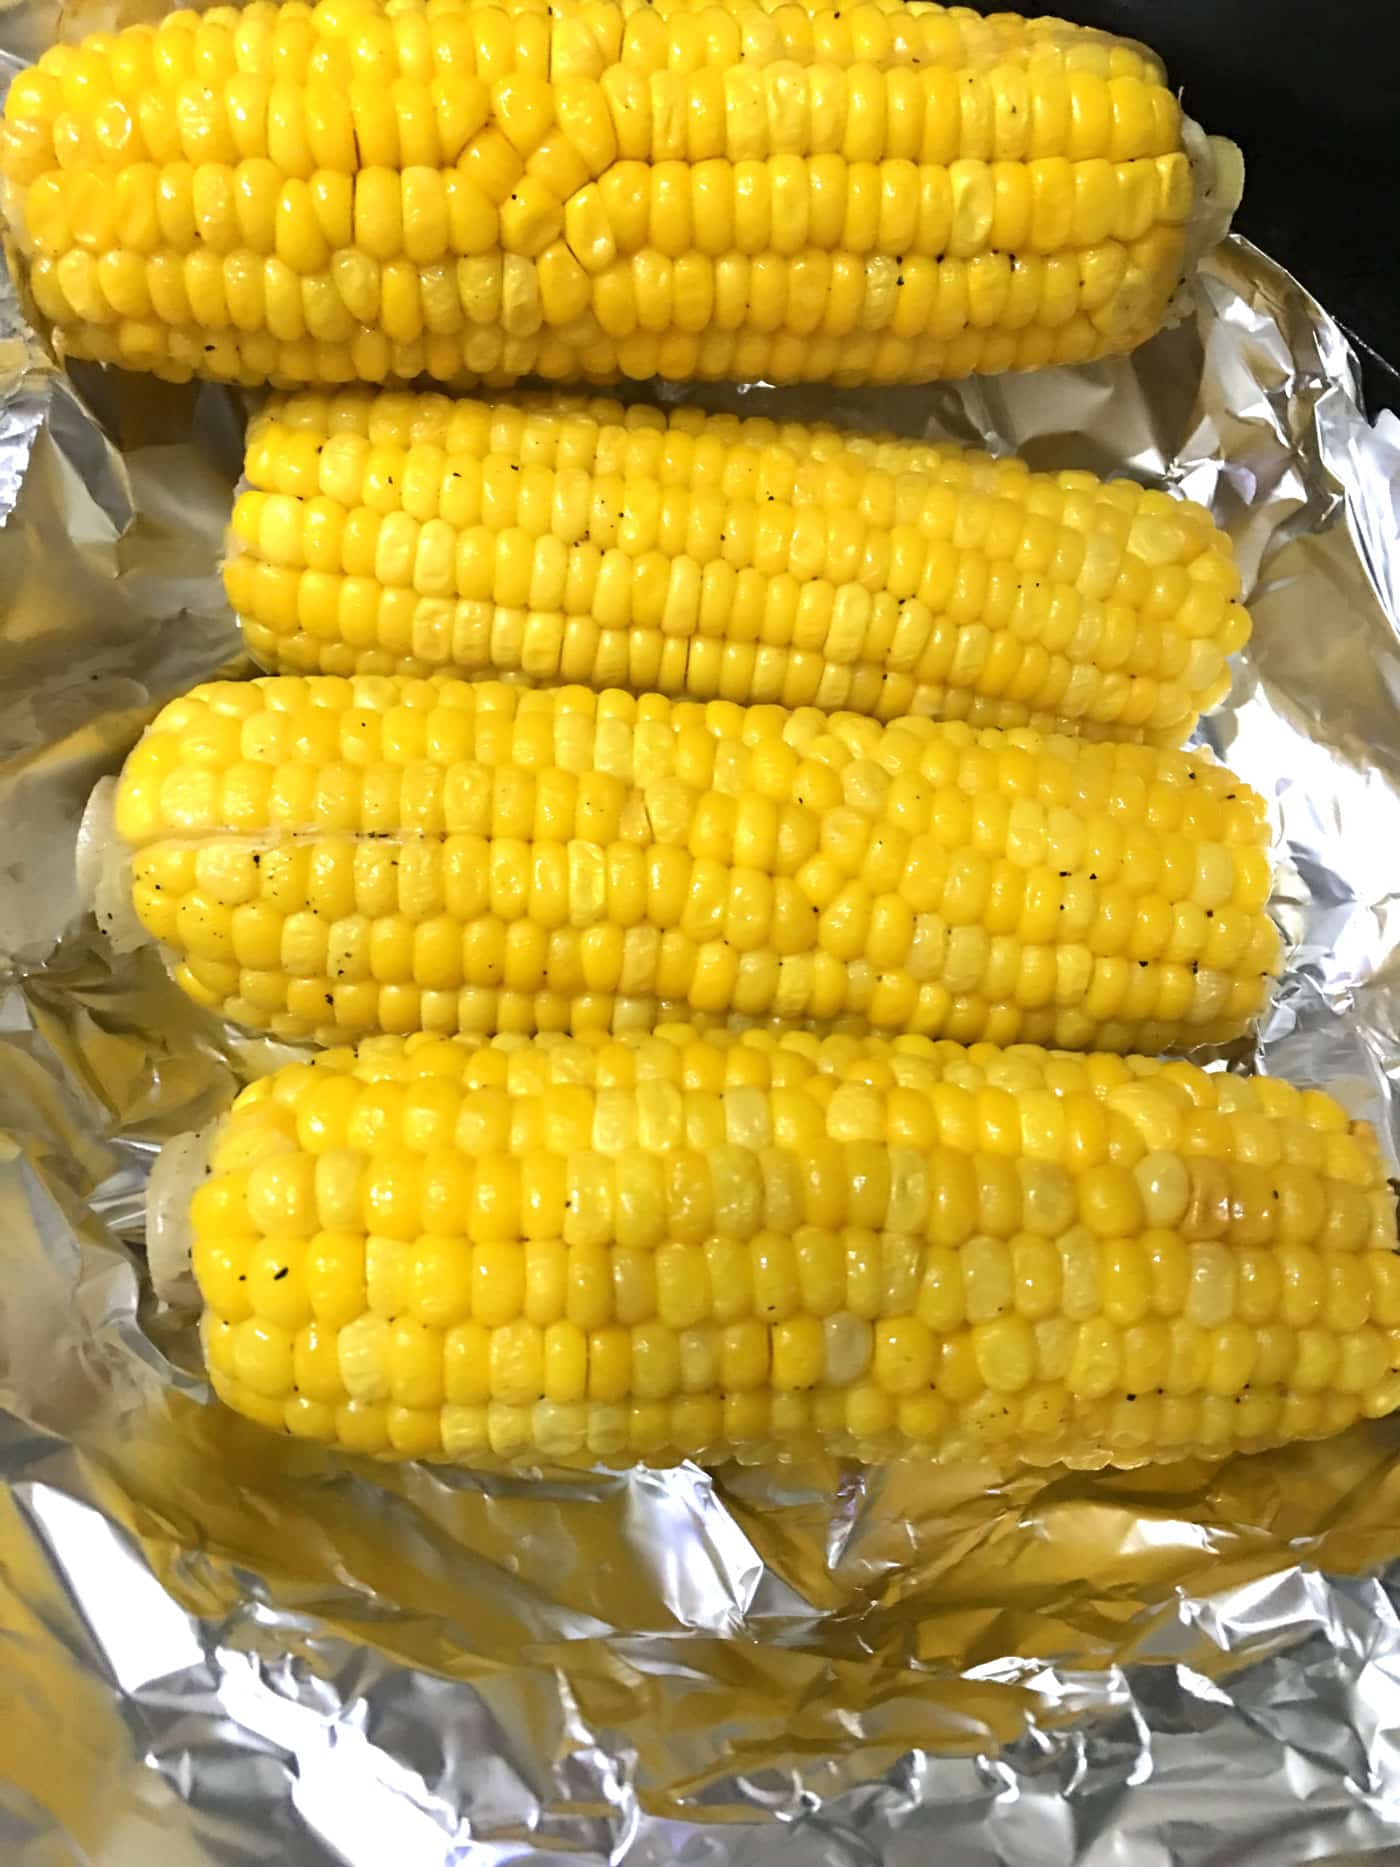 how to boil corn on the cob